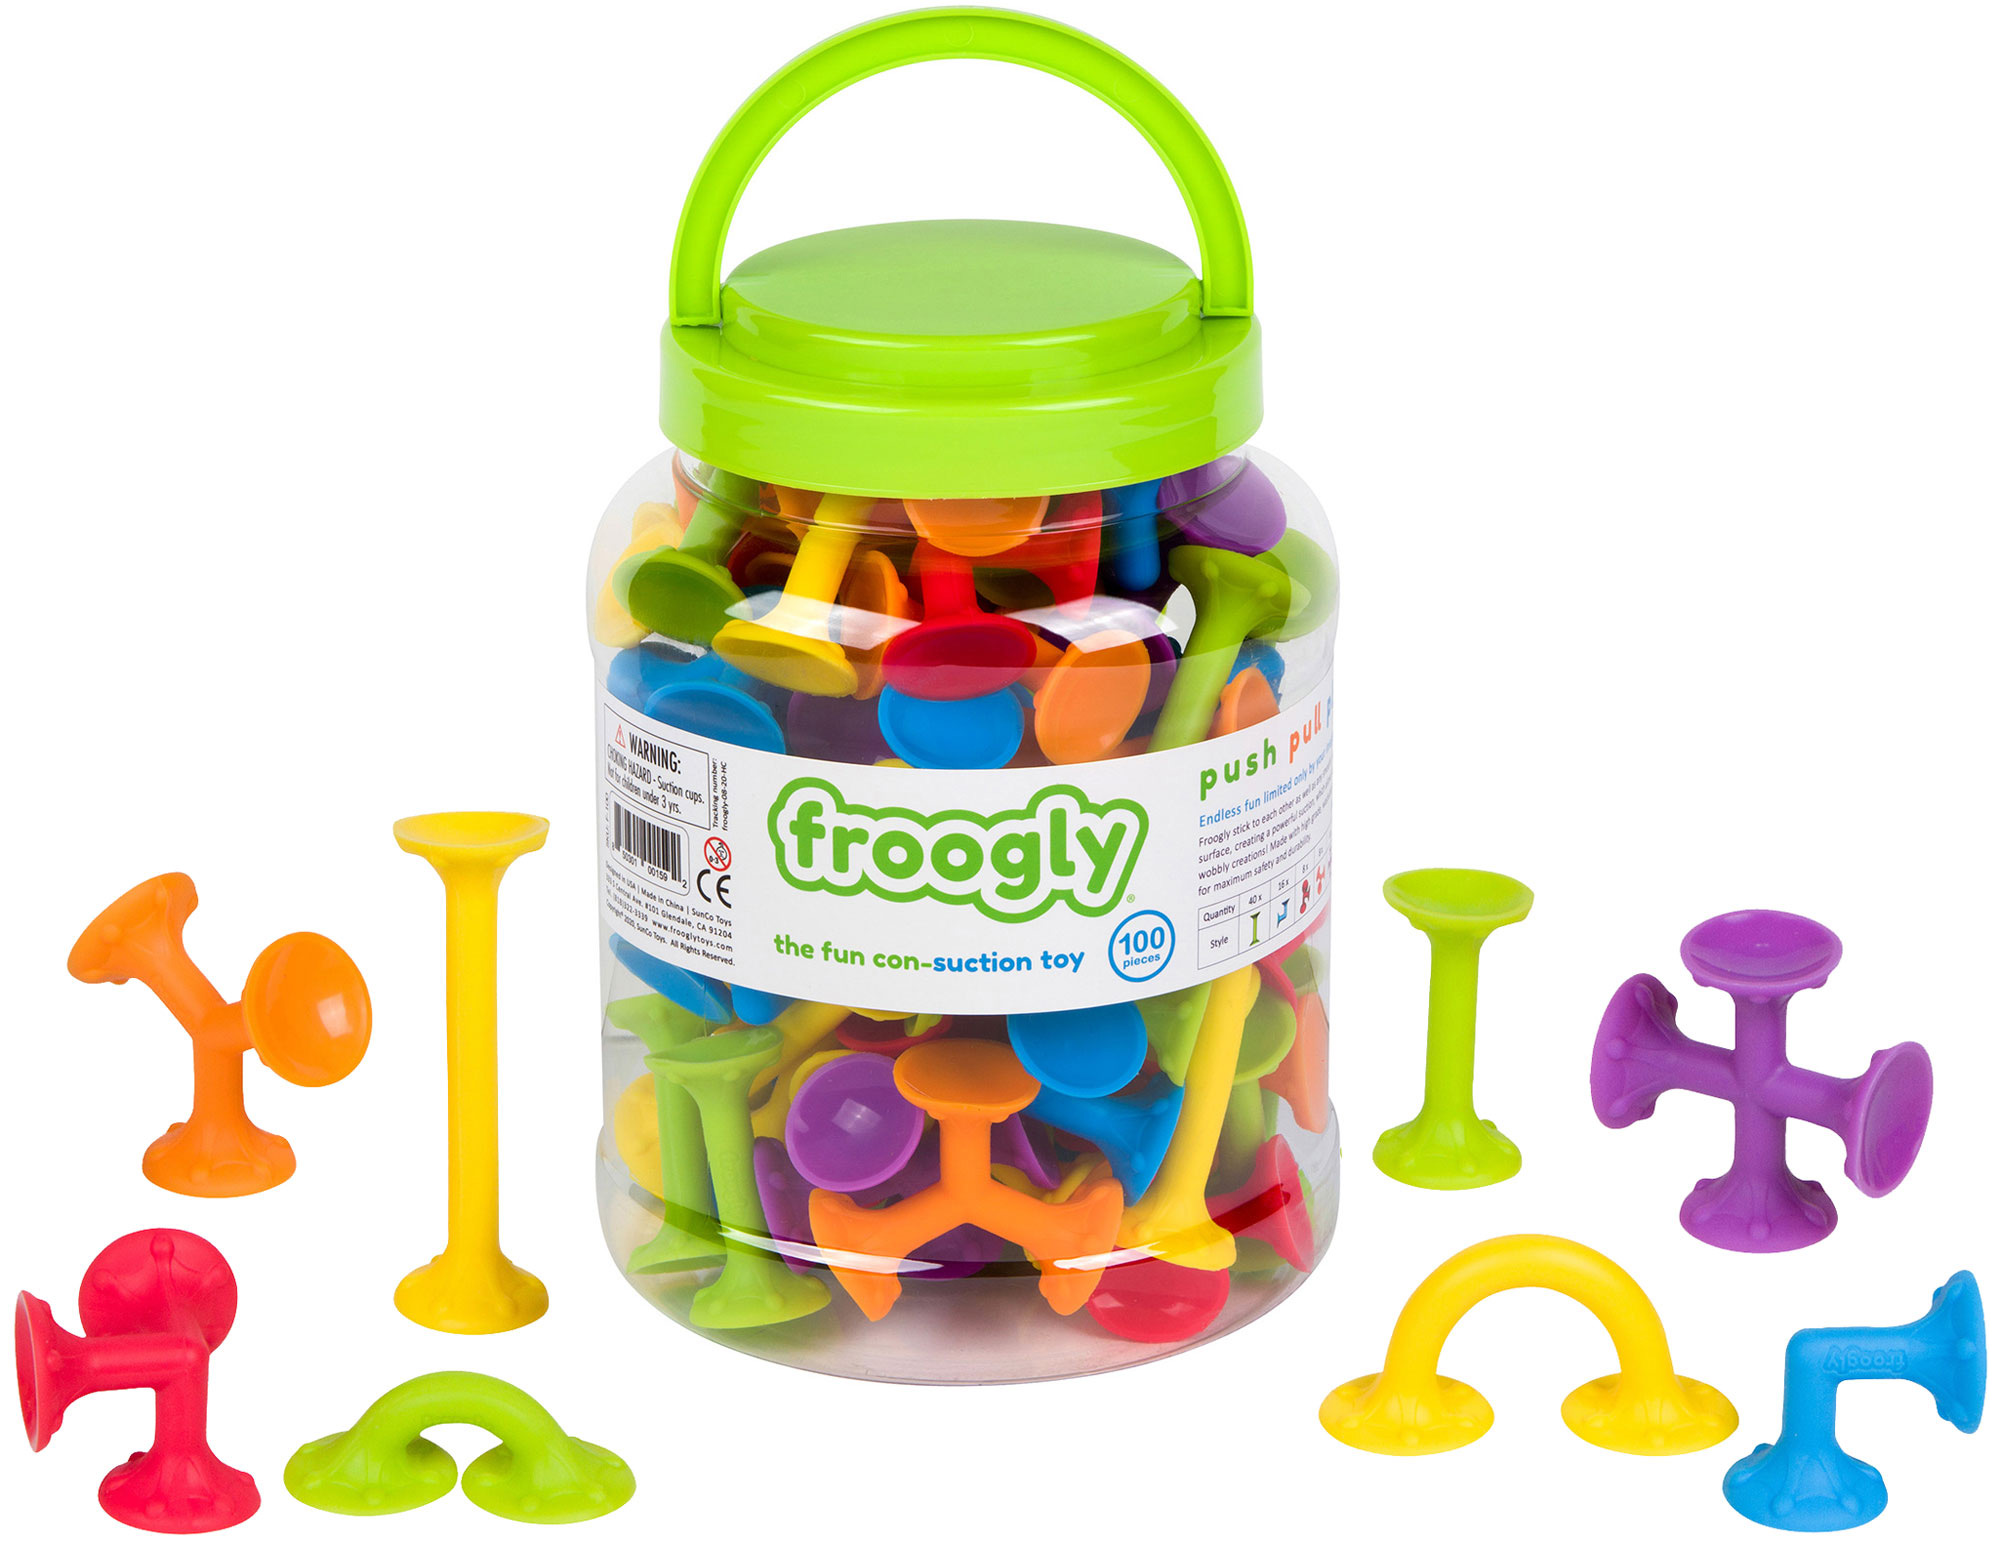 Froogly 100 pcs, innovative design providing stronger suction power